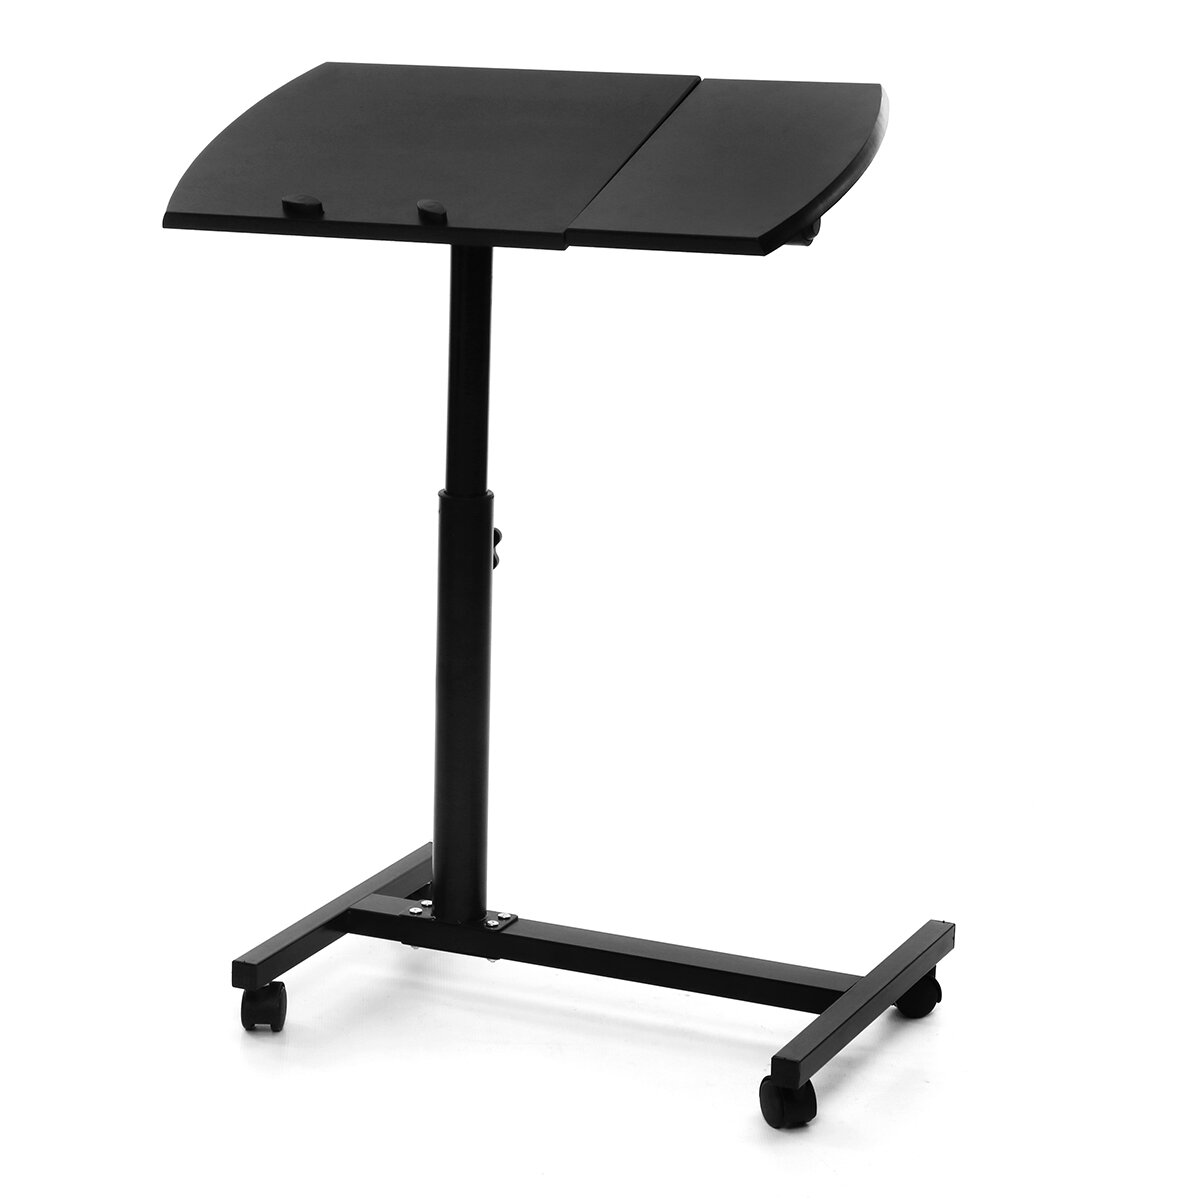 Adjustable Height Laptop Stand Rolling Cart Desk Computer Table